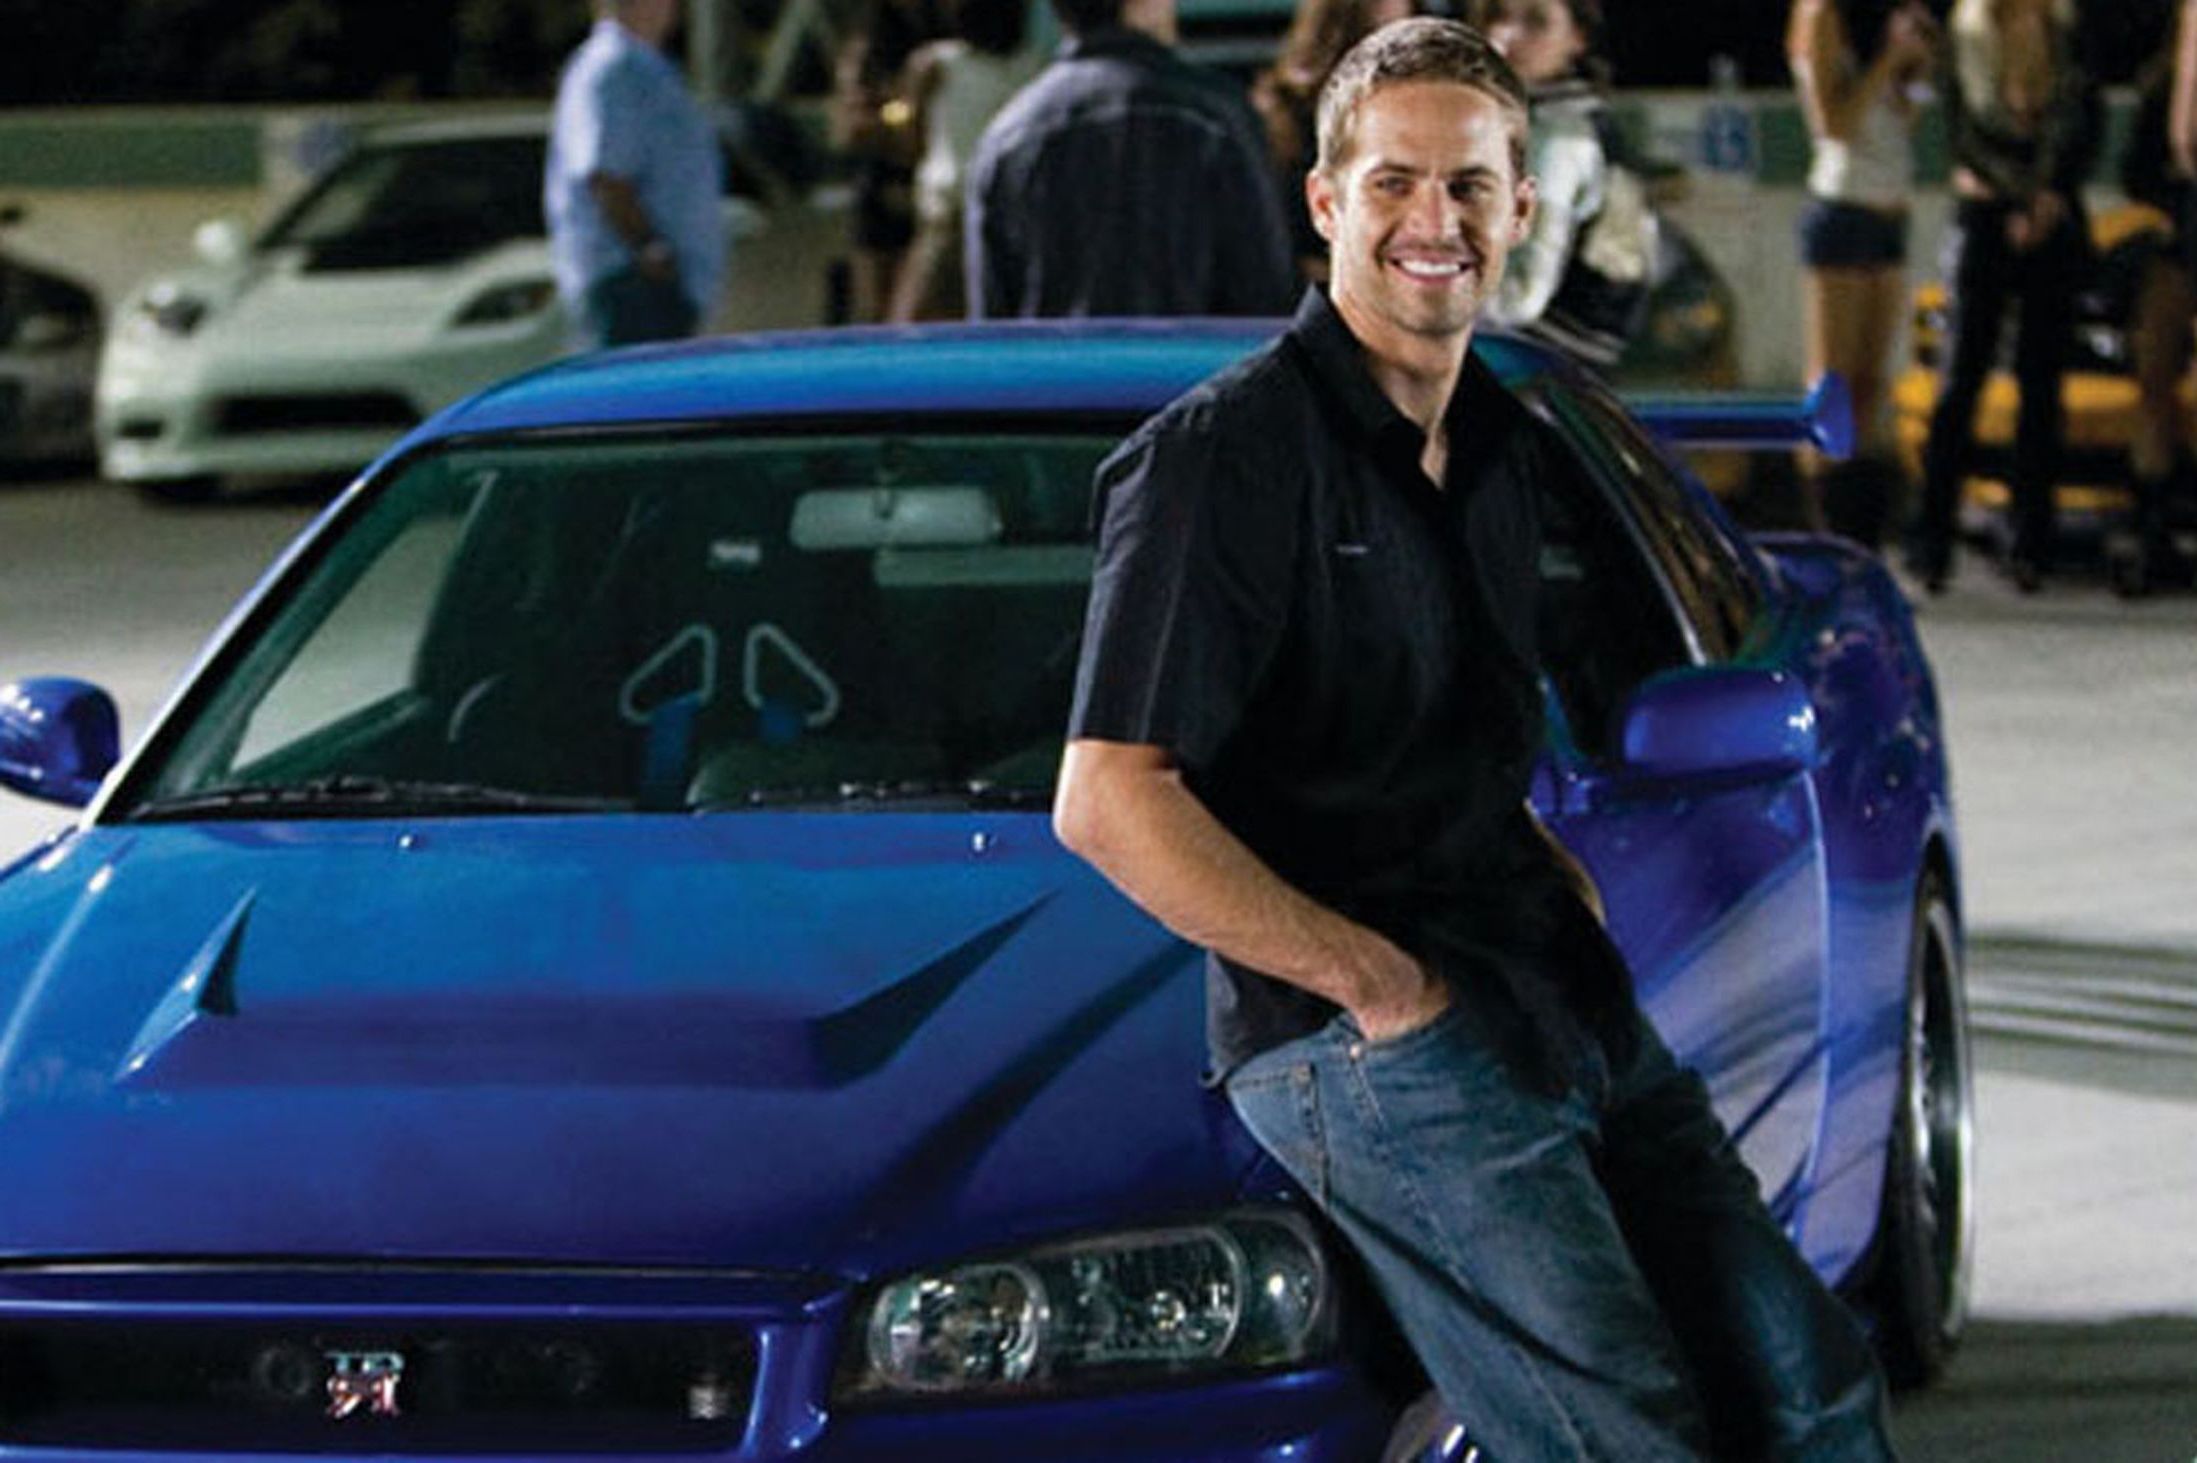 Paul Walker Wallpaper 1080p. Paul walker, Paul walker wallpaper, Fast and furious